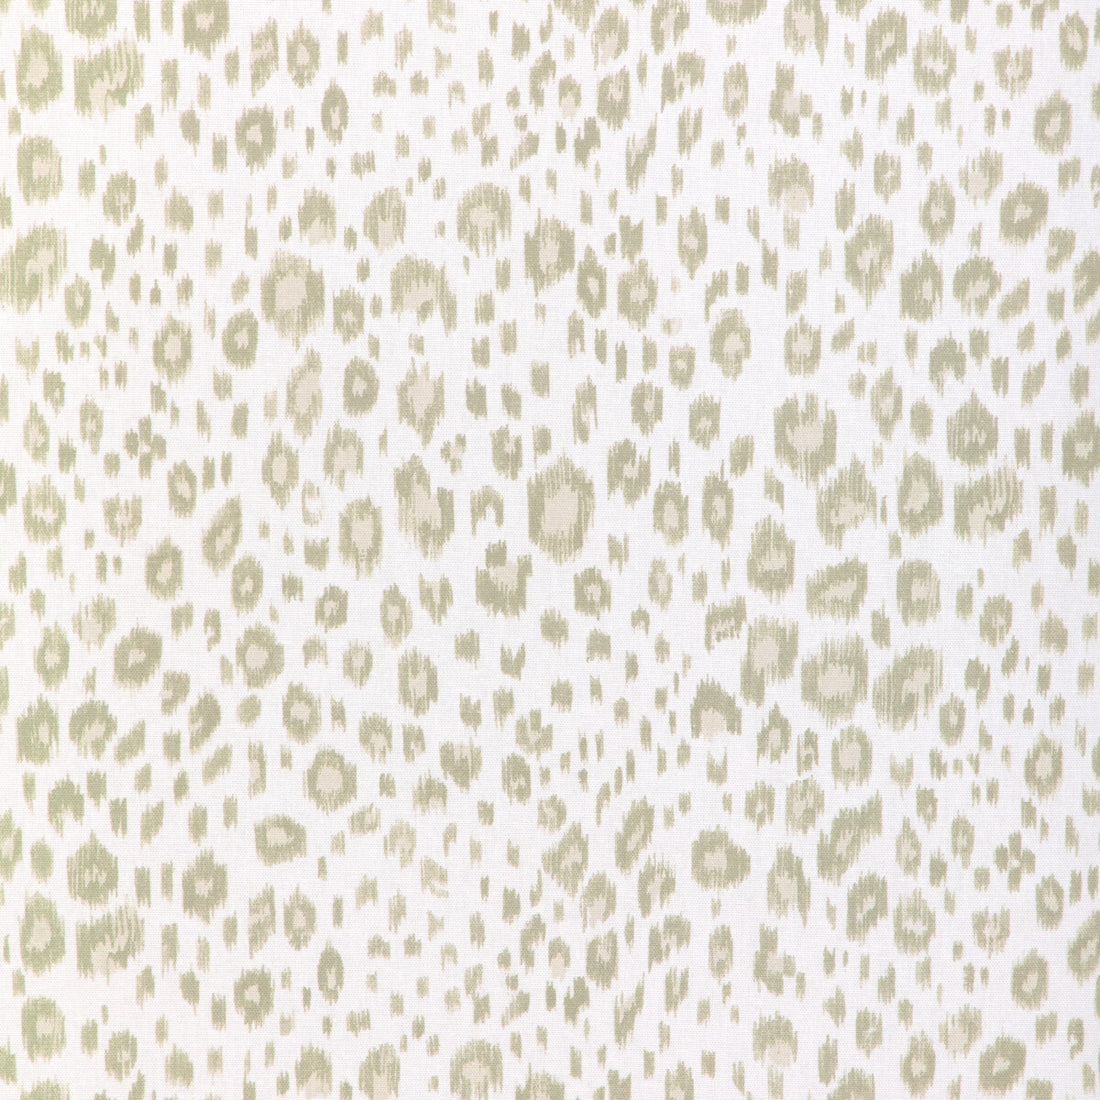 Leopardos fabric in taupe color - pattern LEOPARDOS.161.0 - by Kravet Basics in the Small Scale Prints collection